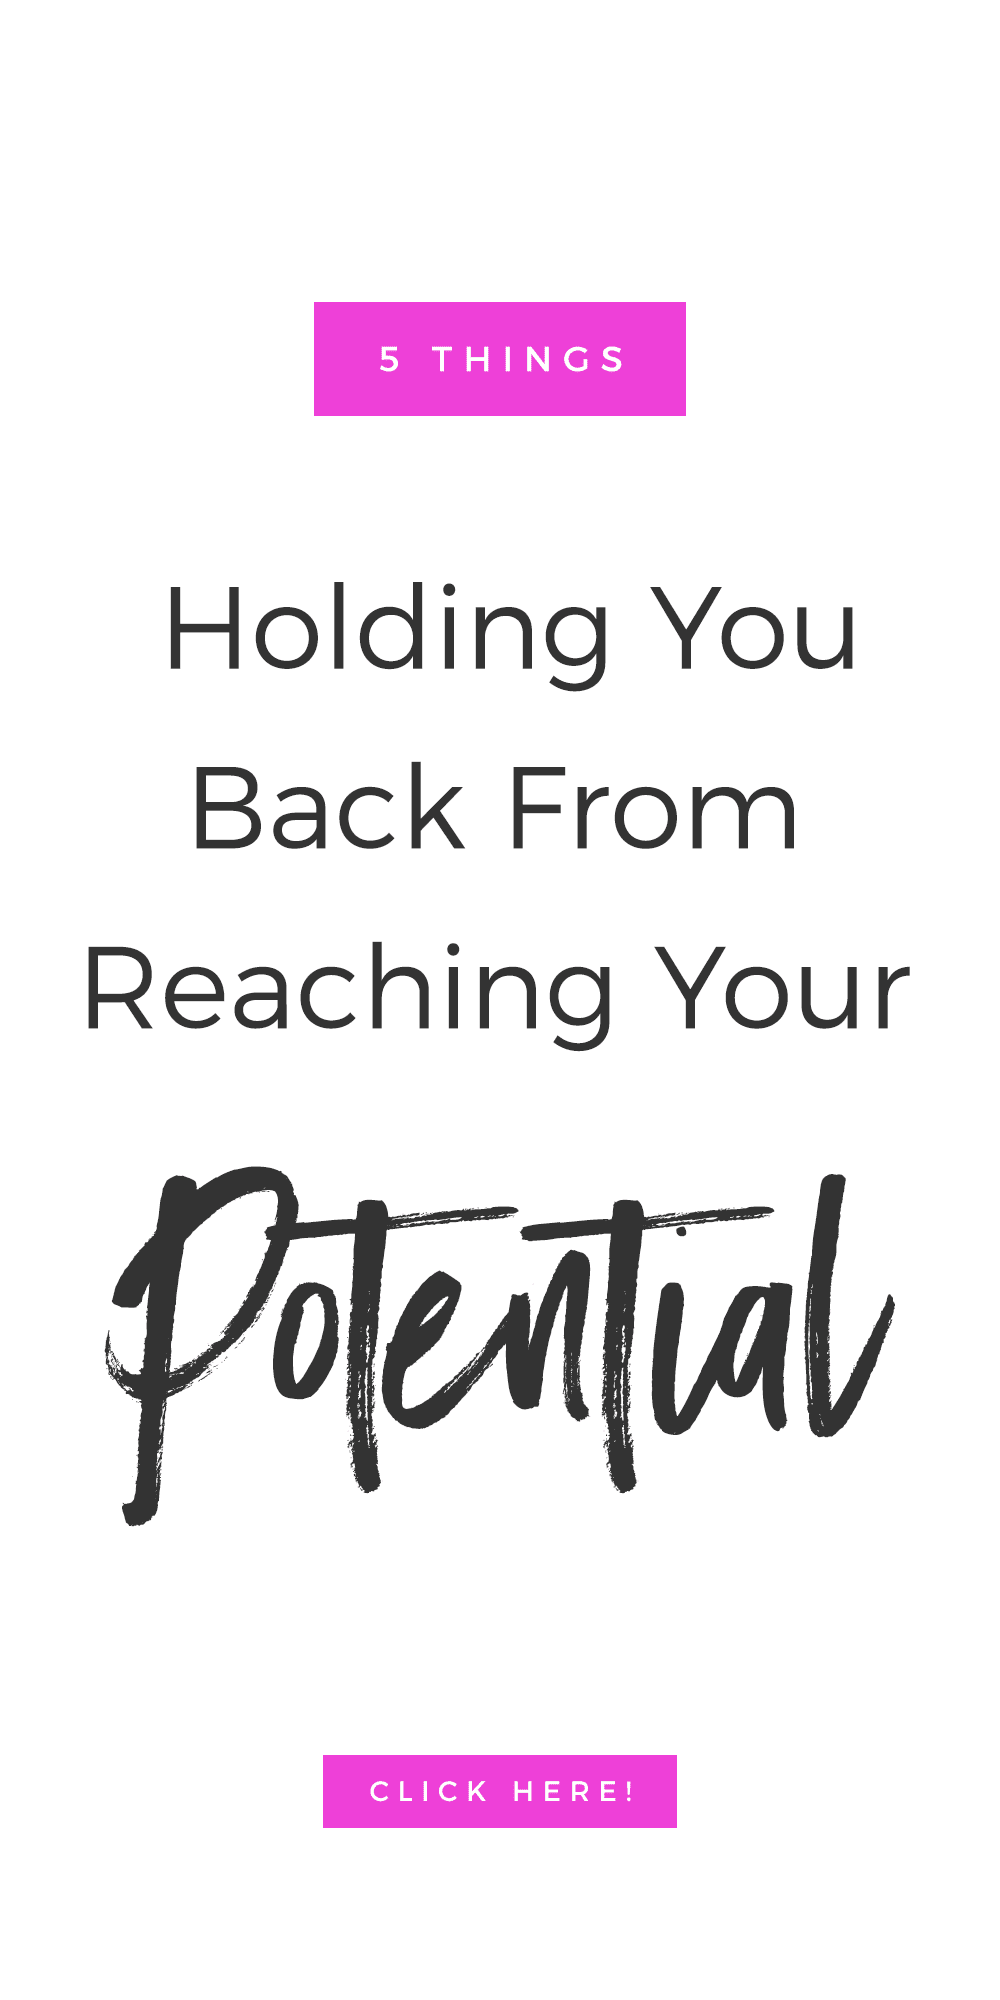 5 Things That Are Holding You Back From Reaching Your Full Potential